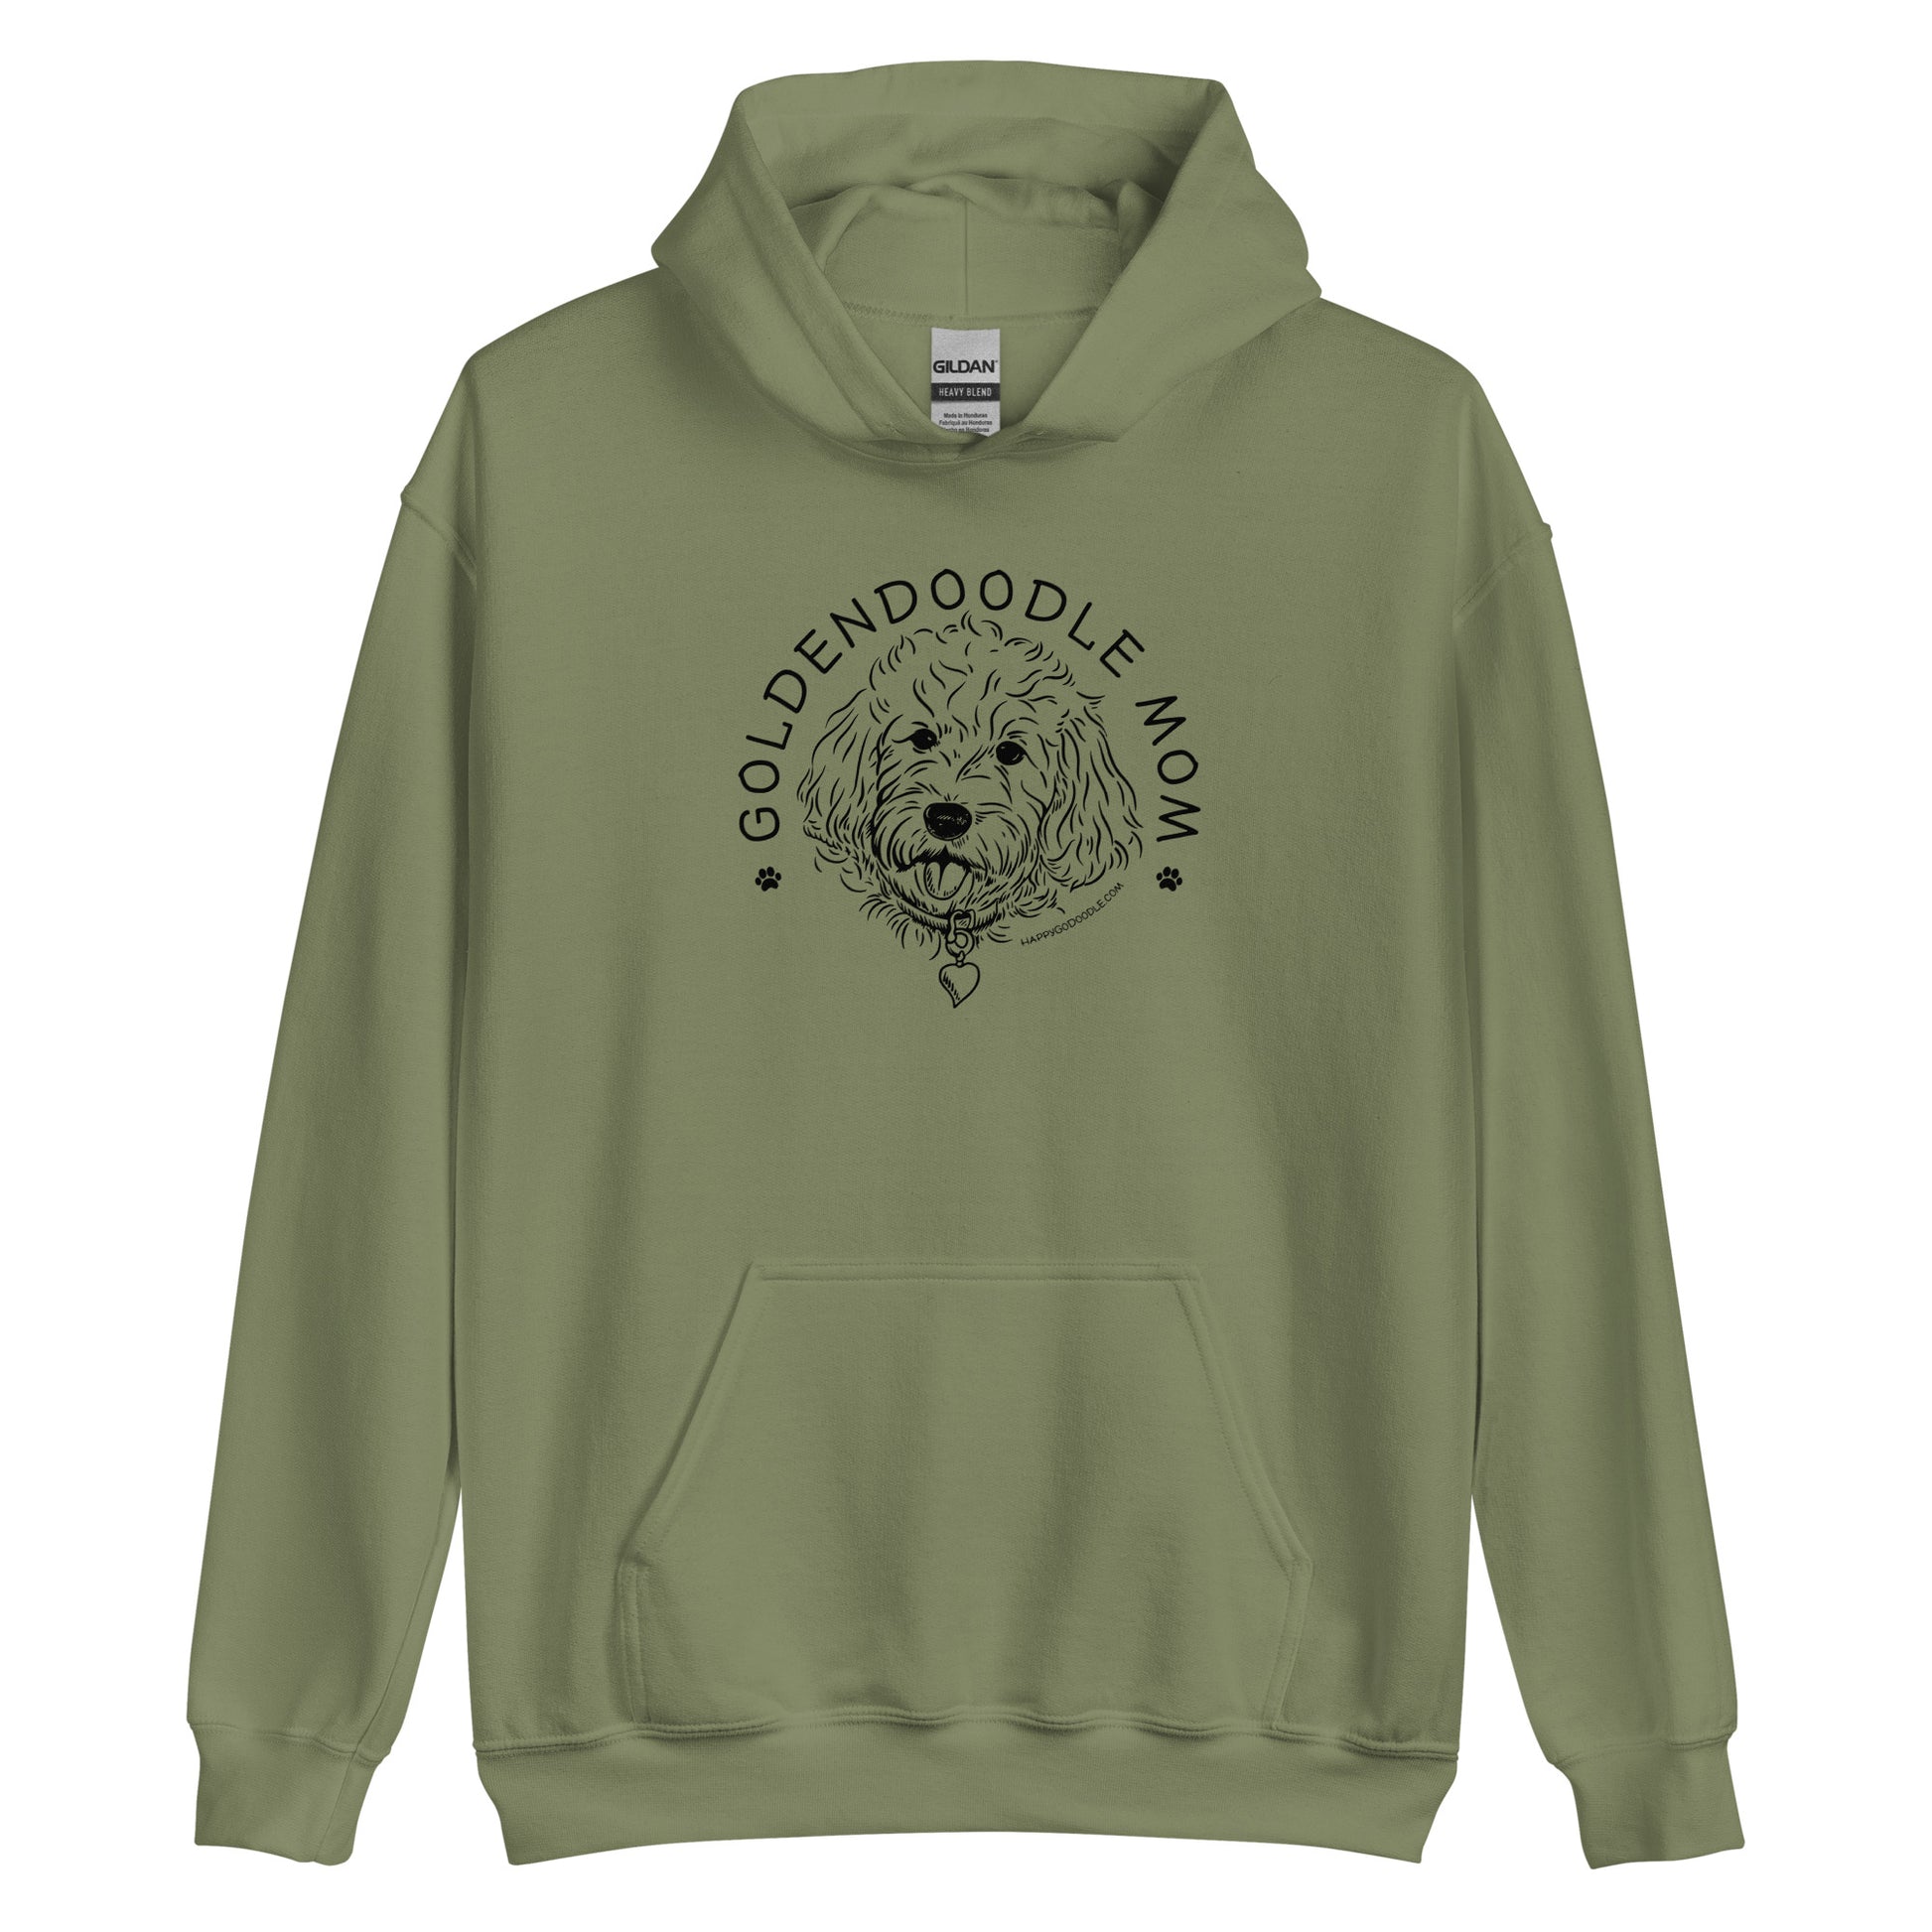 Goldendoodle hoodie with Goldendoodle face and words "Goldendoodle Mom" in military green color